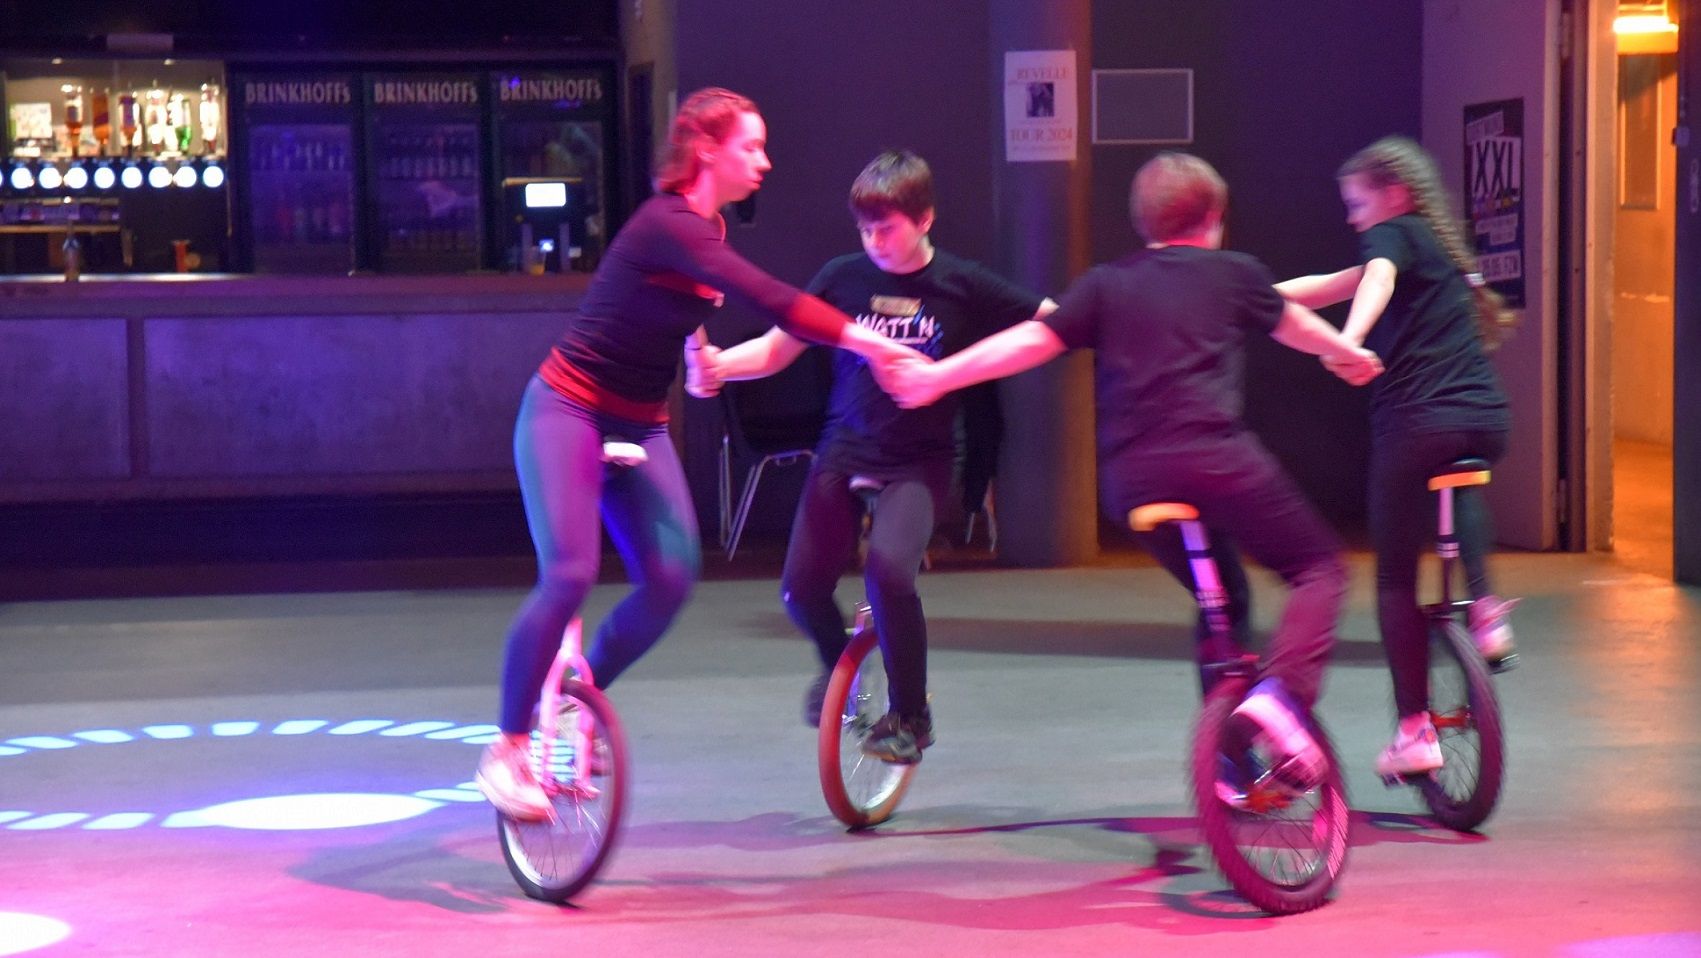 You can see a group of young people on unicycles. They are riding in a circle.